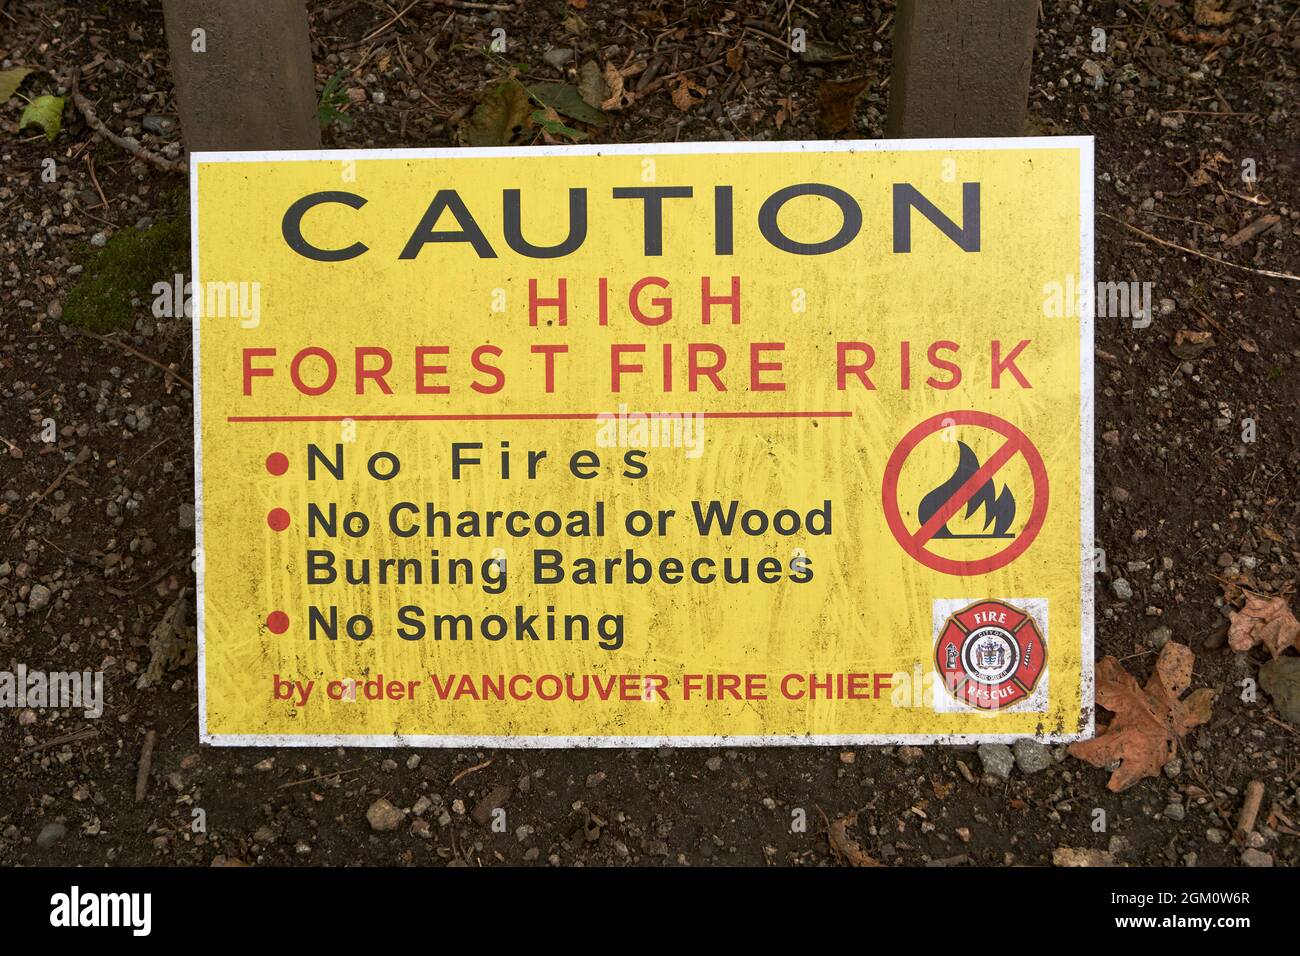 Caution high forest fire risk sign in Vancouver, British Columbia, Canada Stock Photo